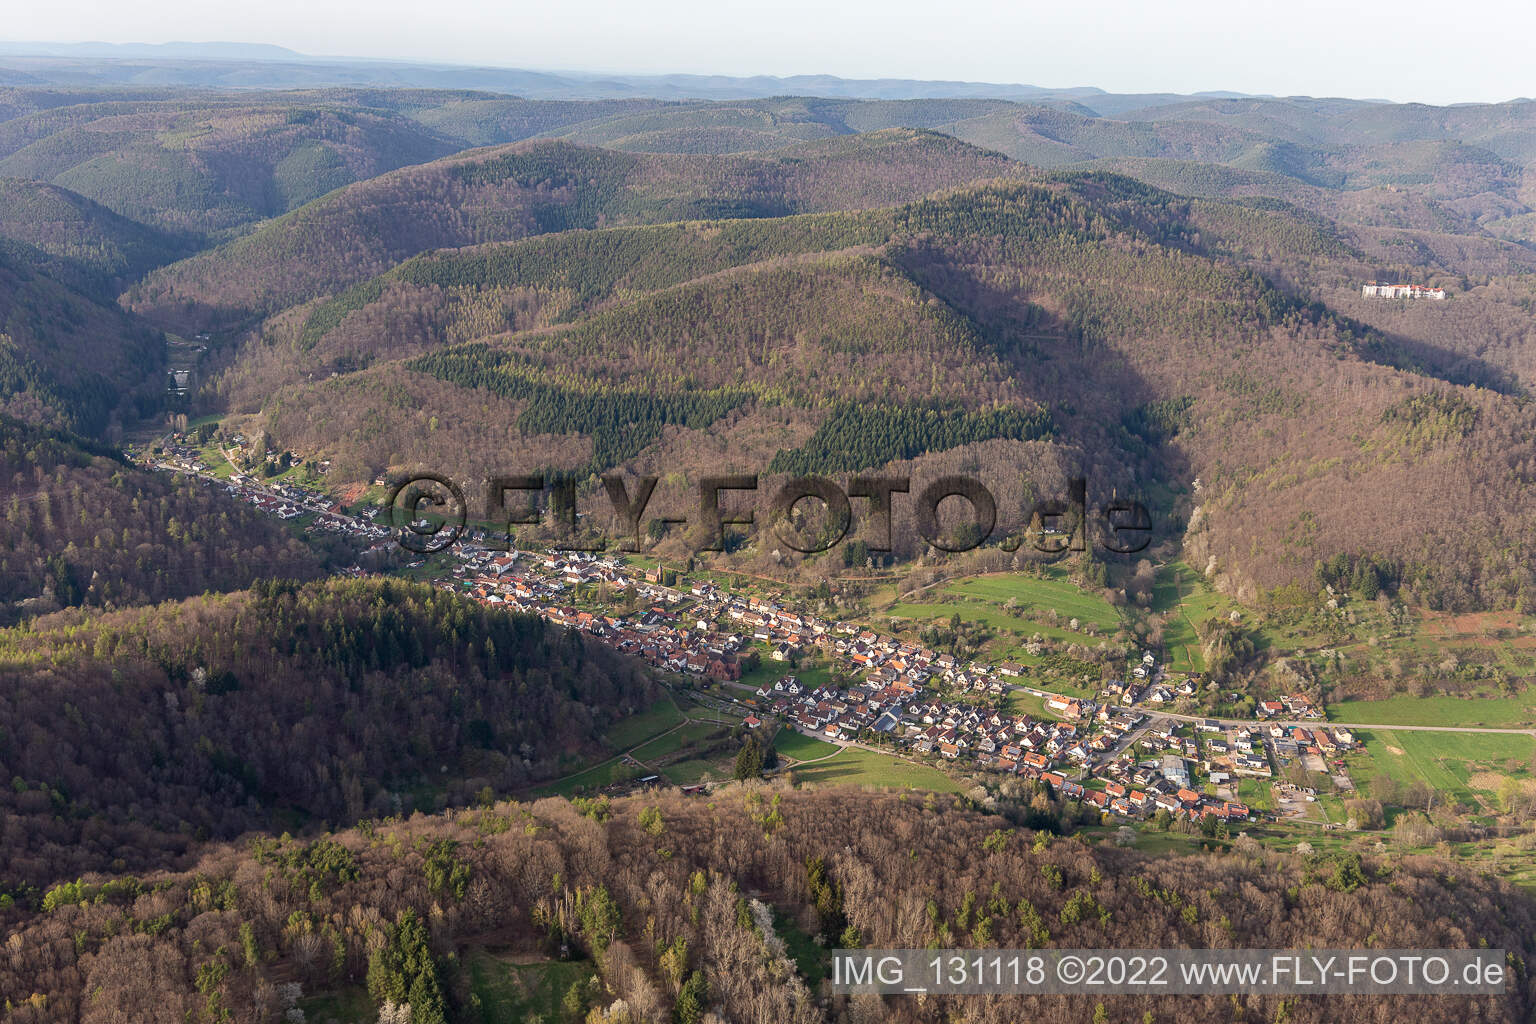 Drone image of Eußerthal in the state Rhineland-Palatinate, Germany